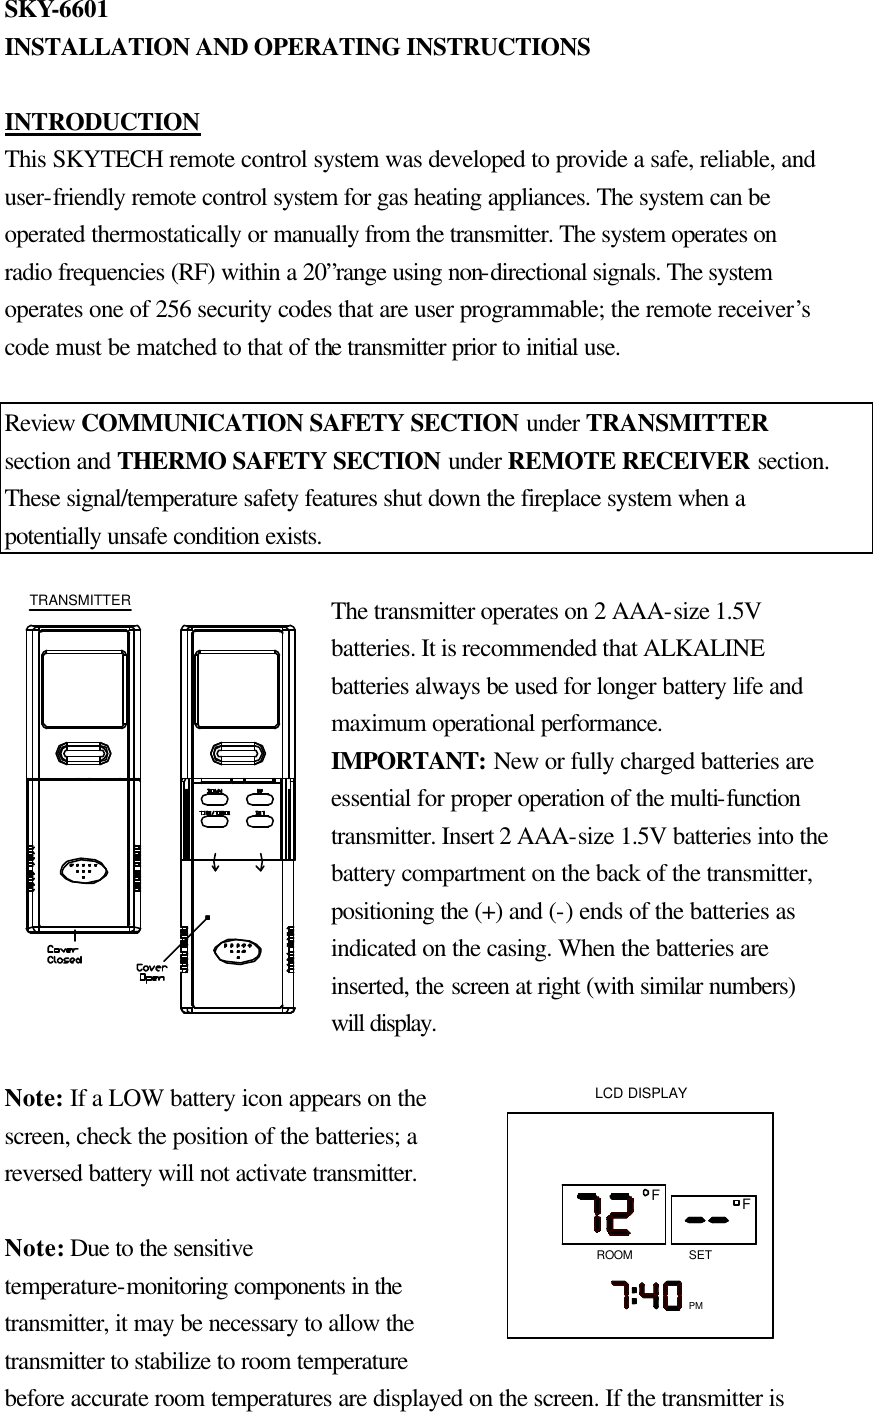 SKY-6601 INSTALLATION AND OPERATING INSTRUCTIONS  INTRODUCTION This SKYTECH remote control system was developed to provide a safe, reliable, and user-friendly remote control system for gas heating appliances. The system can be operated thermostatically or manually from the transmitter. The system operates on radio frequencies (RF) within a 20”range using non-directional signals. The system operates one of 256 security codes that are user programmable; the remote receiver’s code must be matched to that of the transmitter prior to initial use.  Review COMMUNICATION SAFETY SECTION under TRANSMITTER section and THERMO SAFETY SECTION under REMOTE RECEIVER section. These signal/temperature safety features shut down the fireplace system when a potentially unsafe condition exists.  The transmitter operates on 2 AAA-size 1.5V batteries. It is recommended that ALKALINE batteries always be used for longer battery life and maximum operational performance. IMPORTANT: New or fully charged batteries are essential for proper operation of the multi-function transmitter. Insert 2 AAA-size 1.5V batteries into the battery compartment on the back of the transmitter, positioning the (+) and (-) ends of the batteries as indicated on the casing. When the batteries are inserted, the screen at right (with similar numbers) will display.  Note: If a LOW battery icon appears on the screen, check the position of the batteries; a reversed battery will not activate transmitter.  Note: Due to the sensitive temperature-monitoring components in the transmitter, it may be necessary to allow the transmitter to stabilize to room temperature before accurate room temperatures are displayed on the screen. If the transmitter is TRANSMITTERPMSETLCD DISPLAYFFROOM